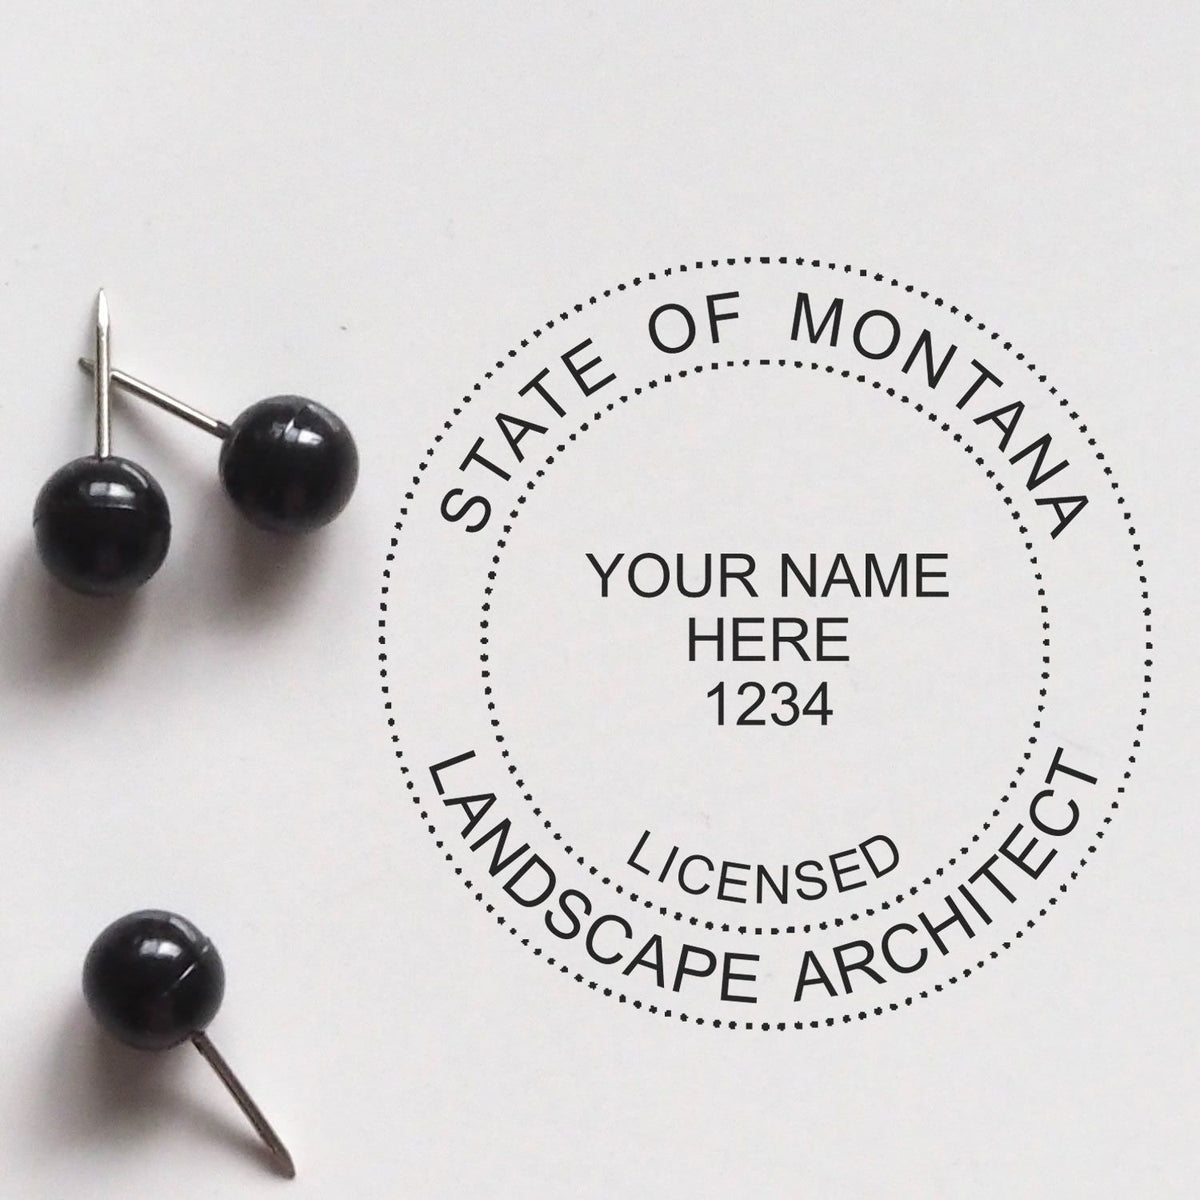 This paper is stamped with a sample imprint of the Premium MaxLight Pre-Inked Montana Landscape Architectural Stamp, signifying its quality and reliability.